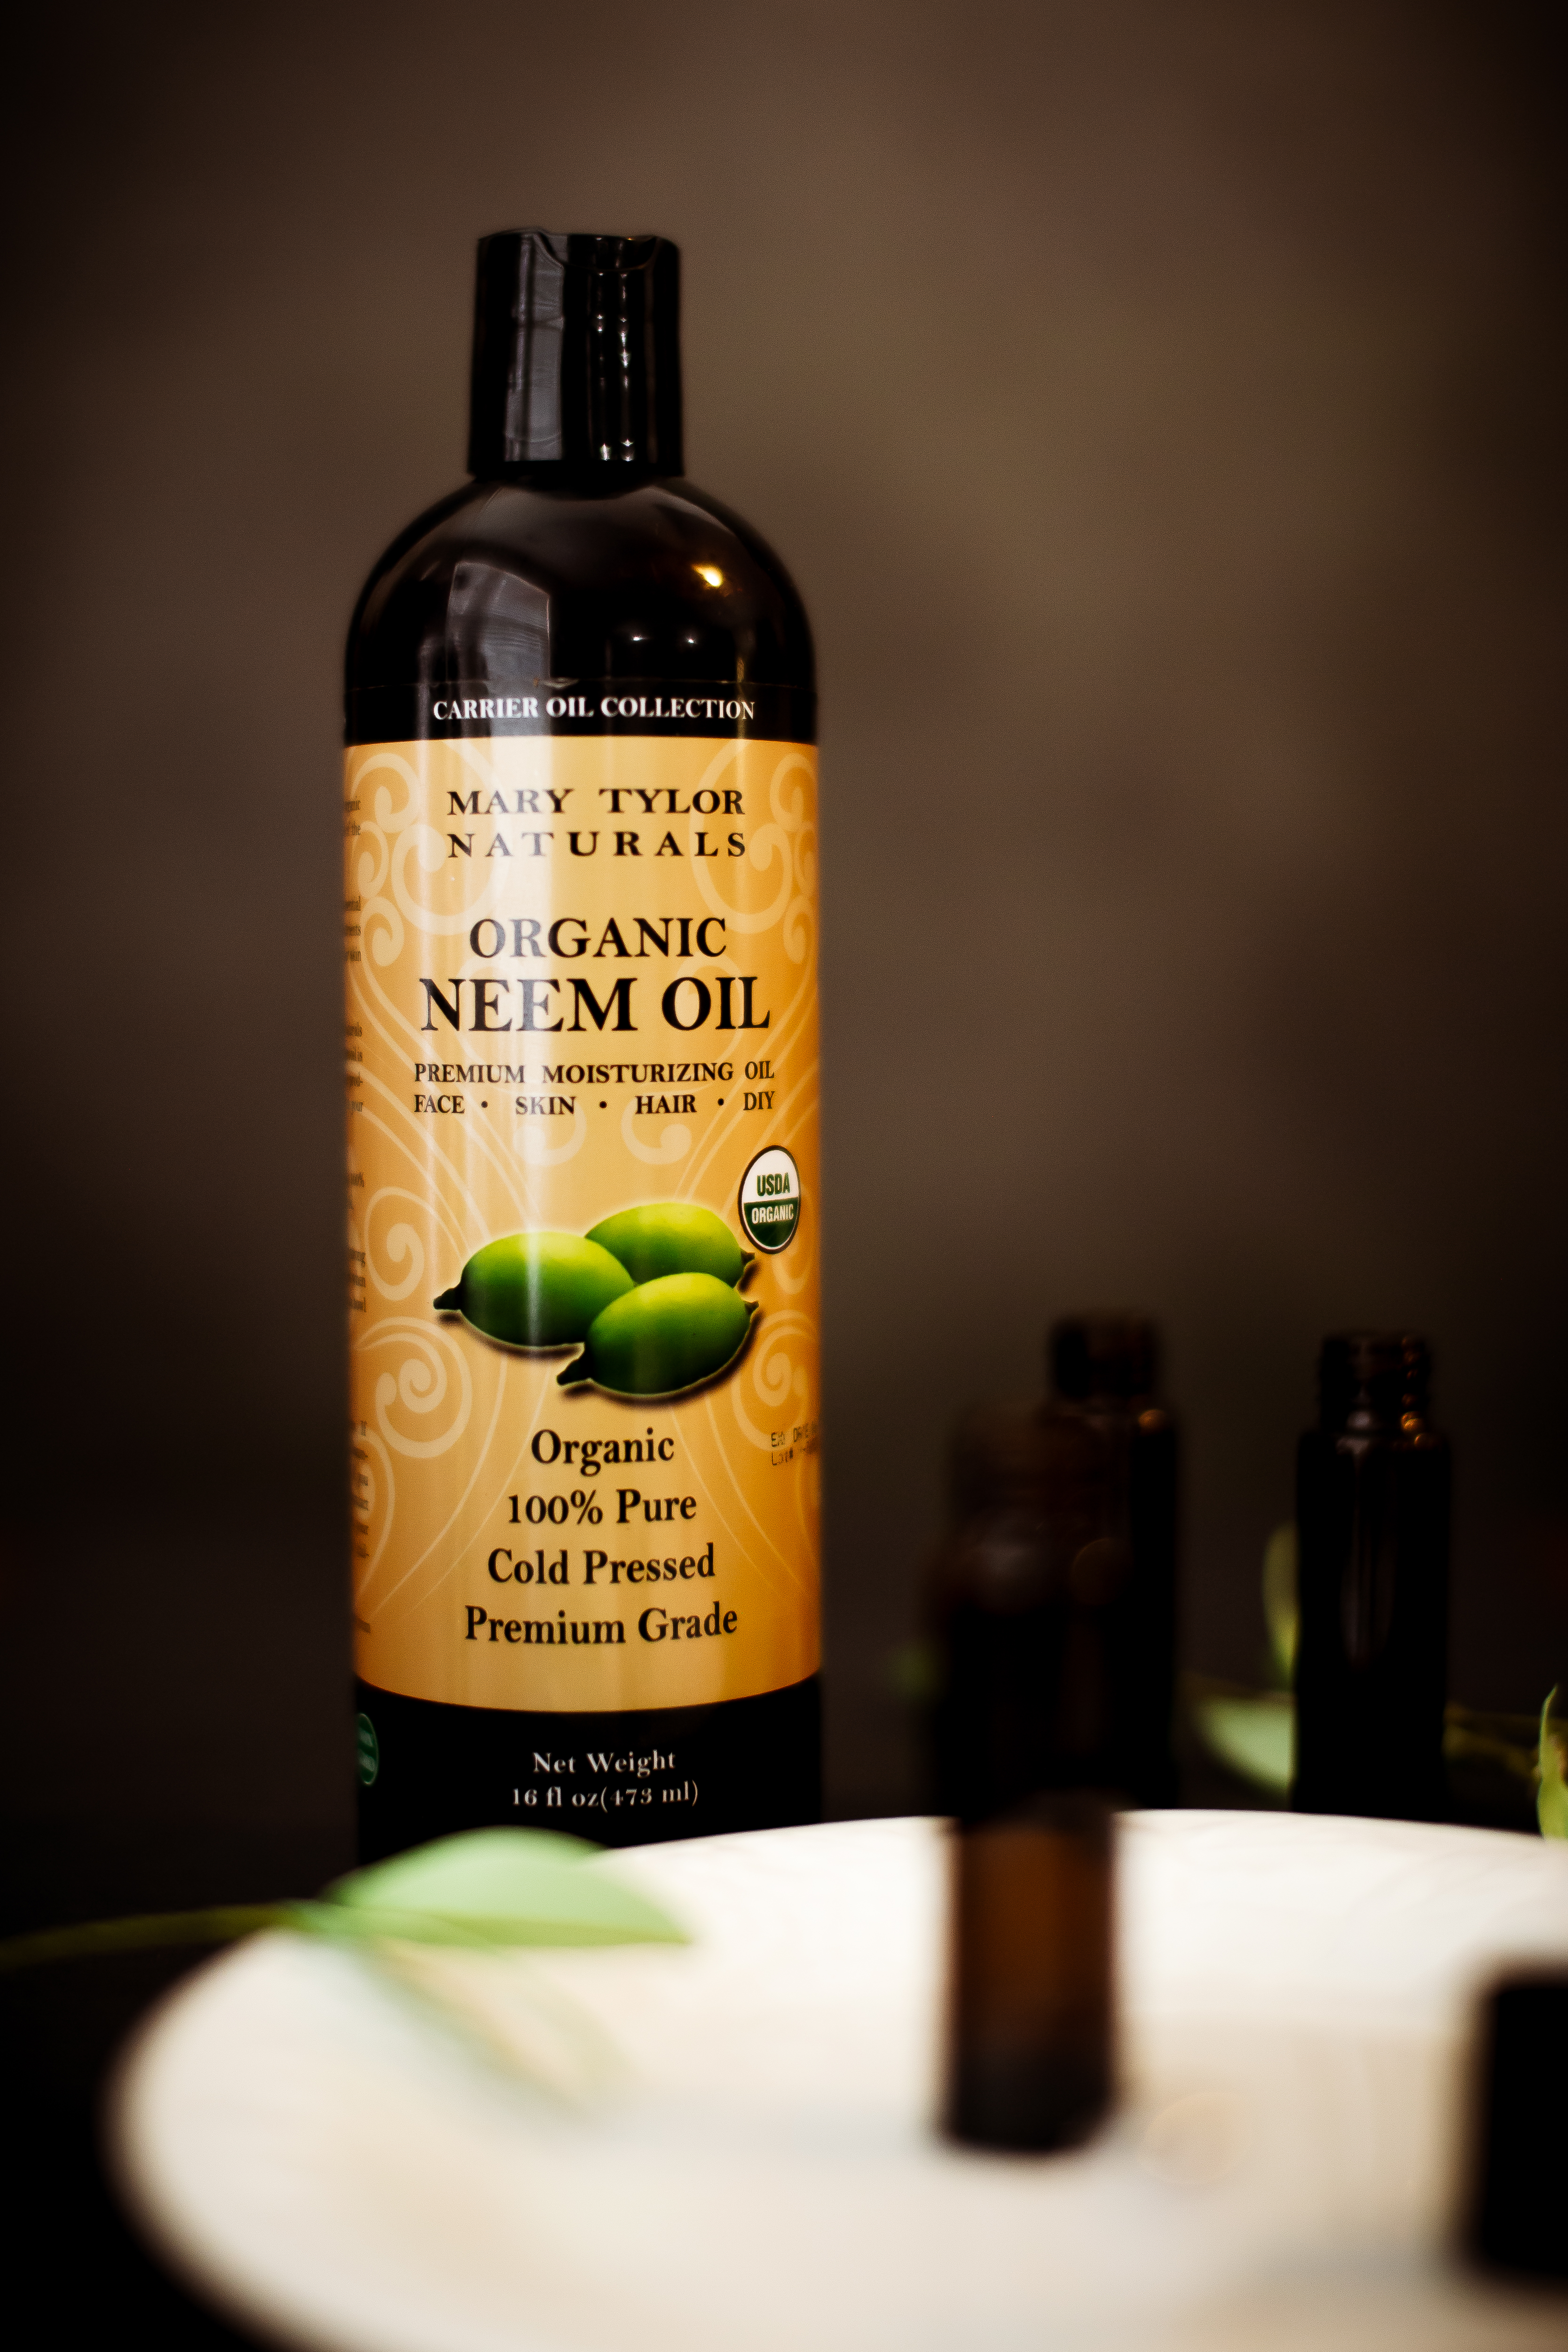 Mary Taylor Naturals Presents Wellness and Rejuvenation of Organic Neem Oil